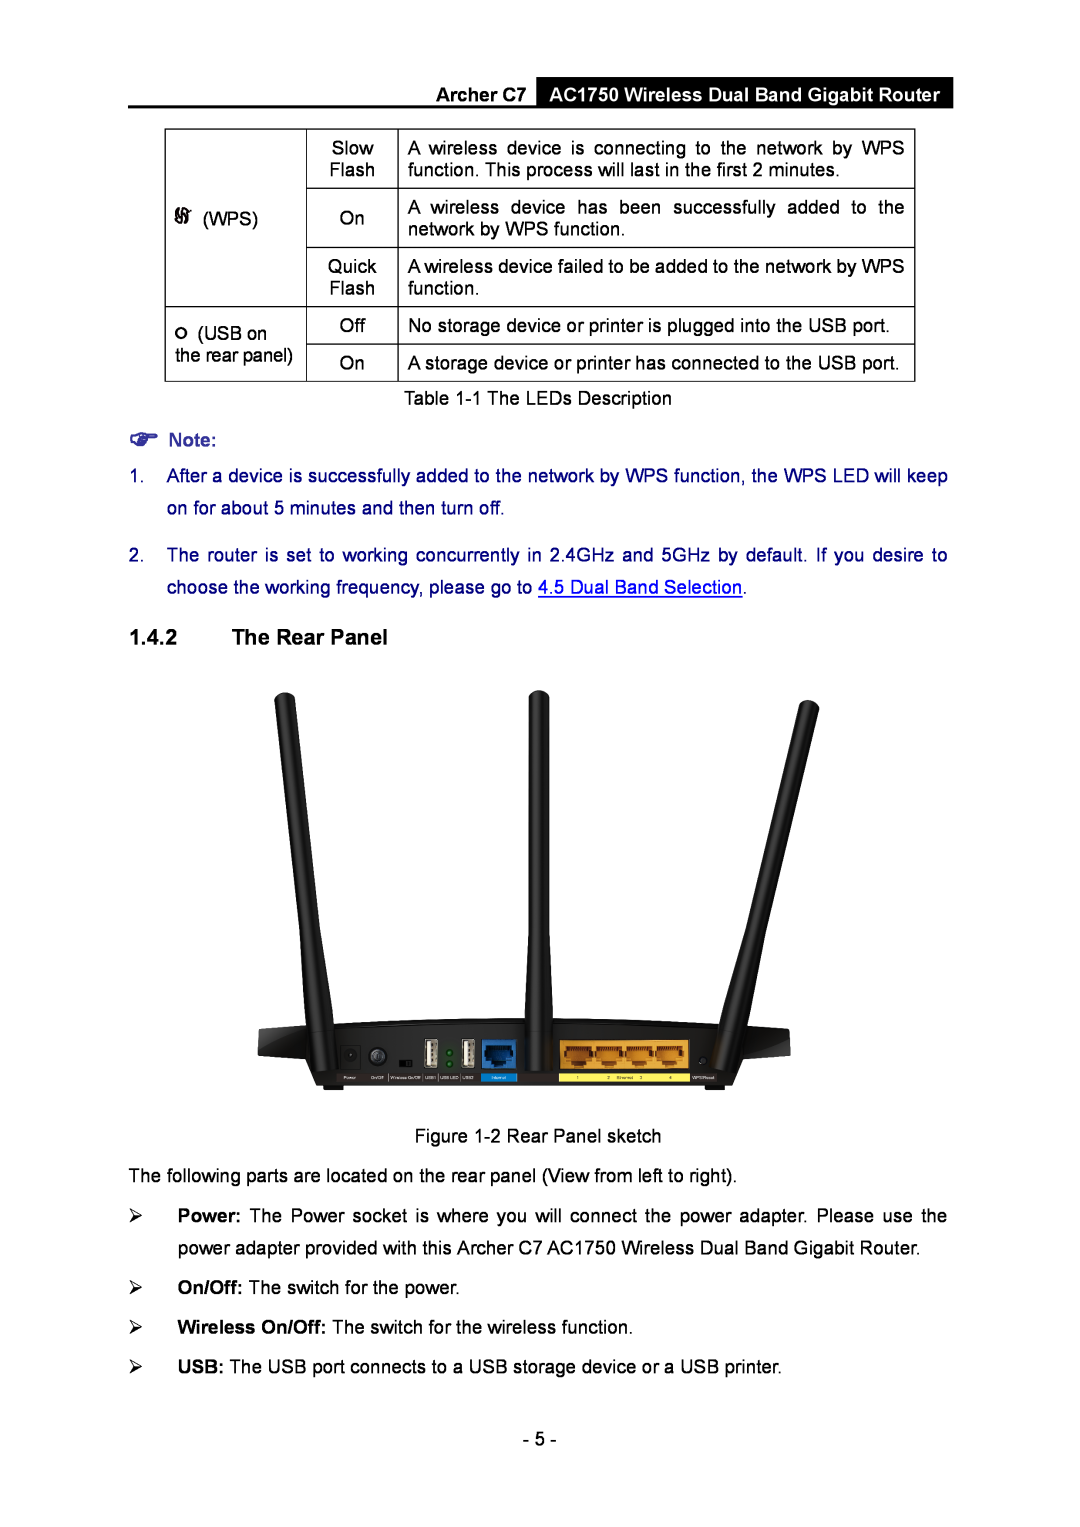 TP-Link manual The Rear Panel, Archer C7, AC1750 Wireless Dual Band Gigabit Router,  Note 